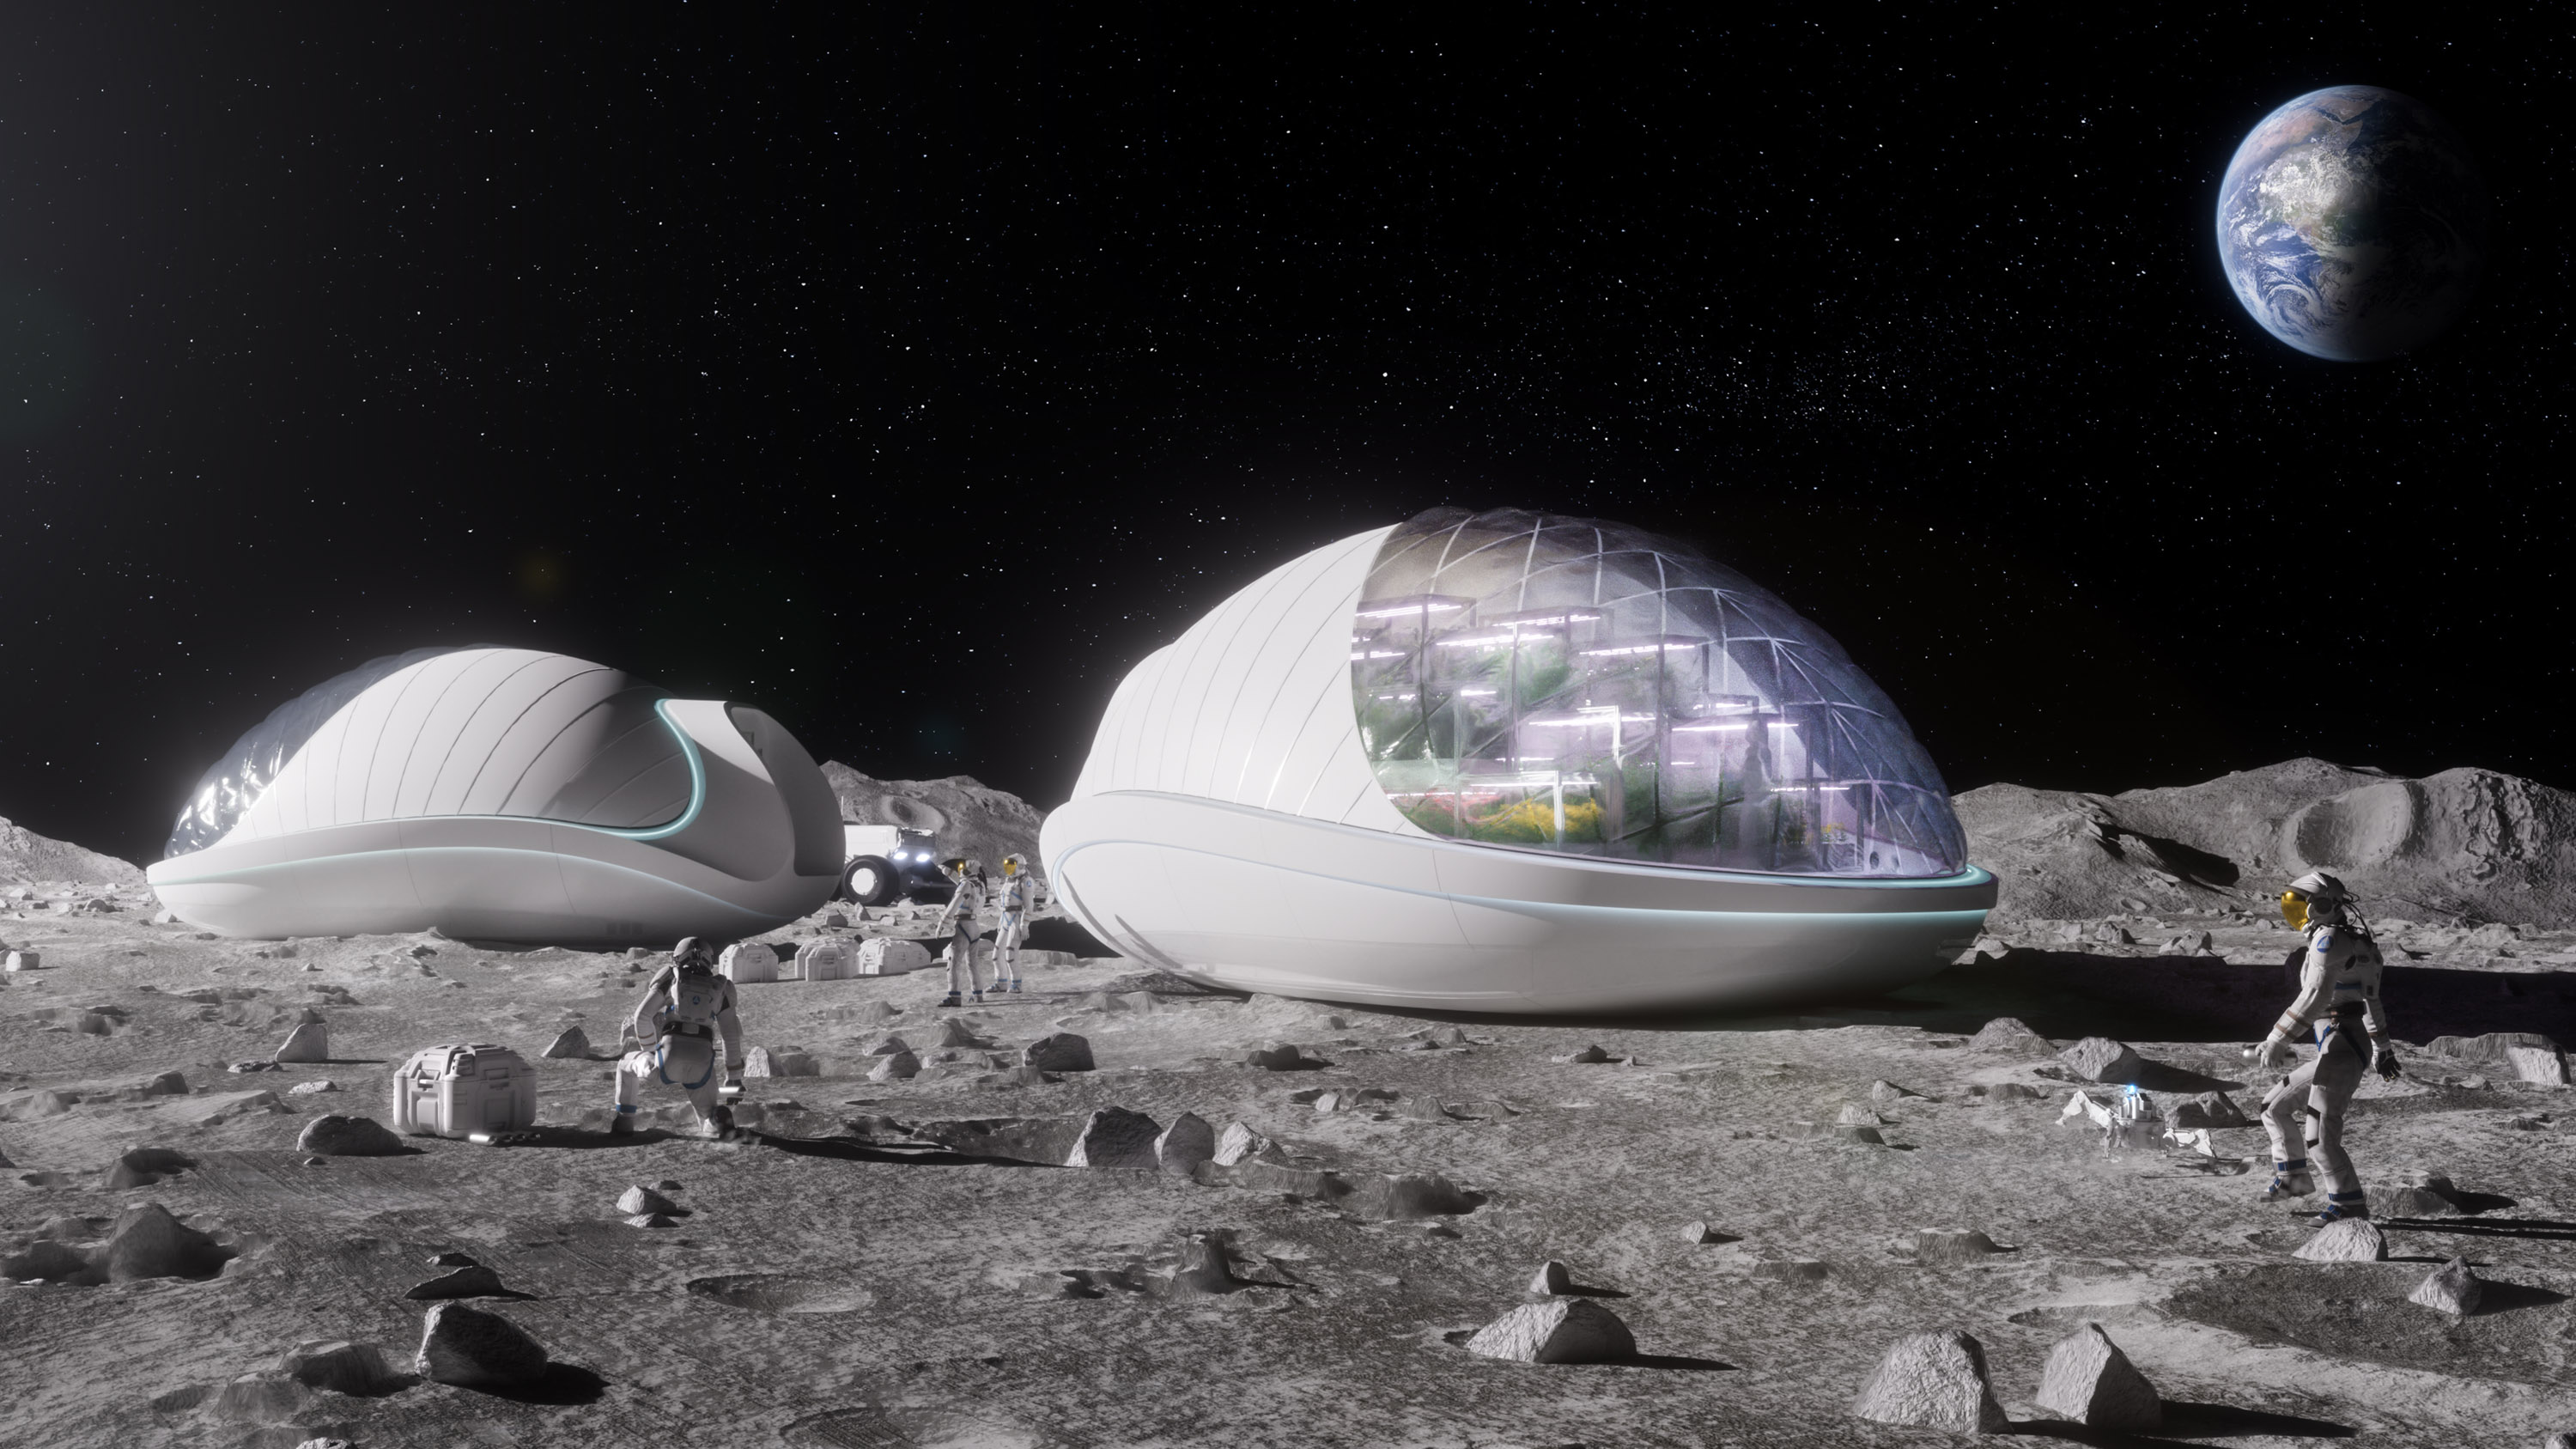 artist's rendering of two biopods on the moon with astronauts walking nearby.